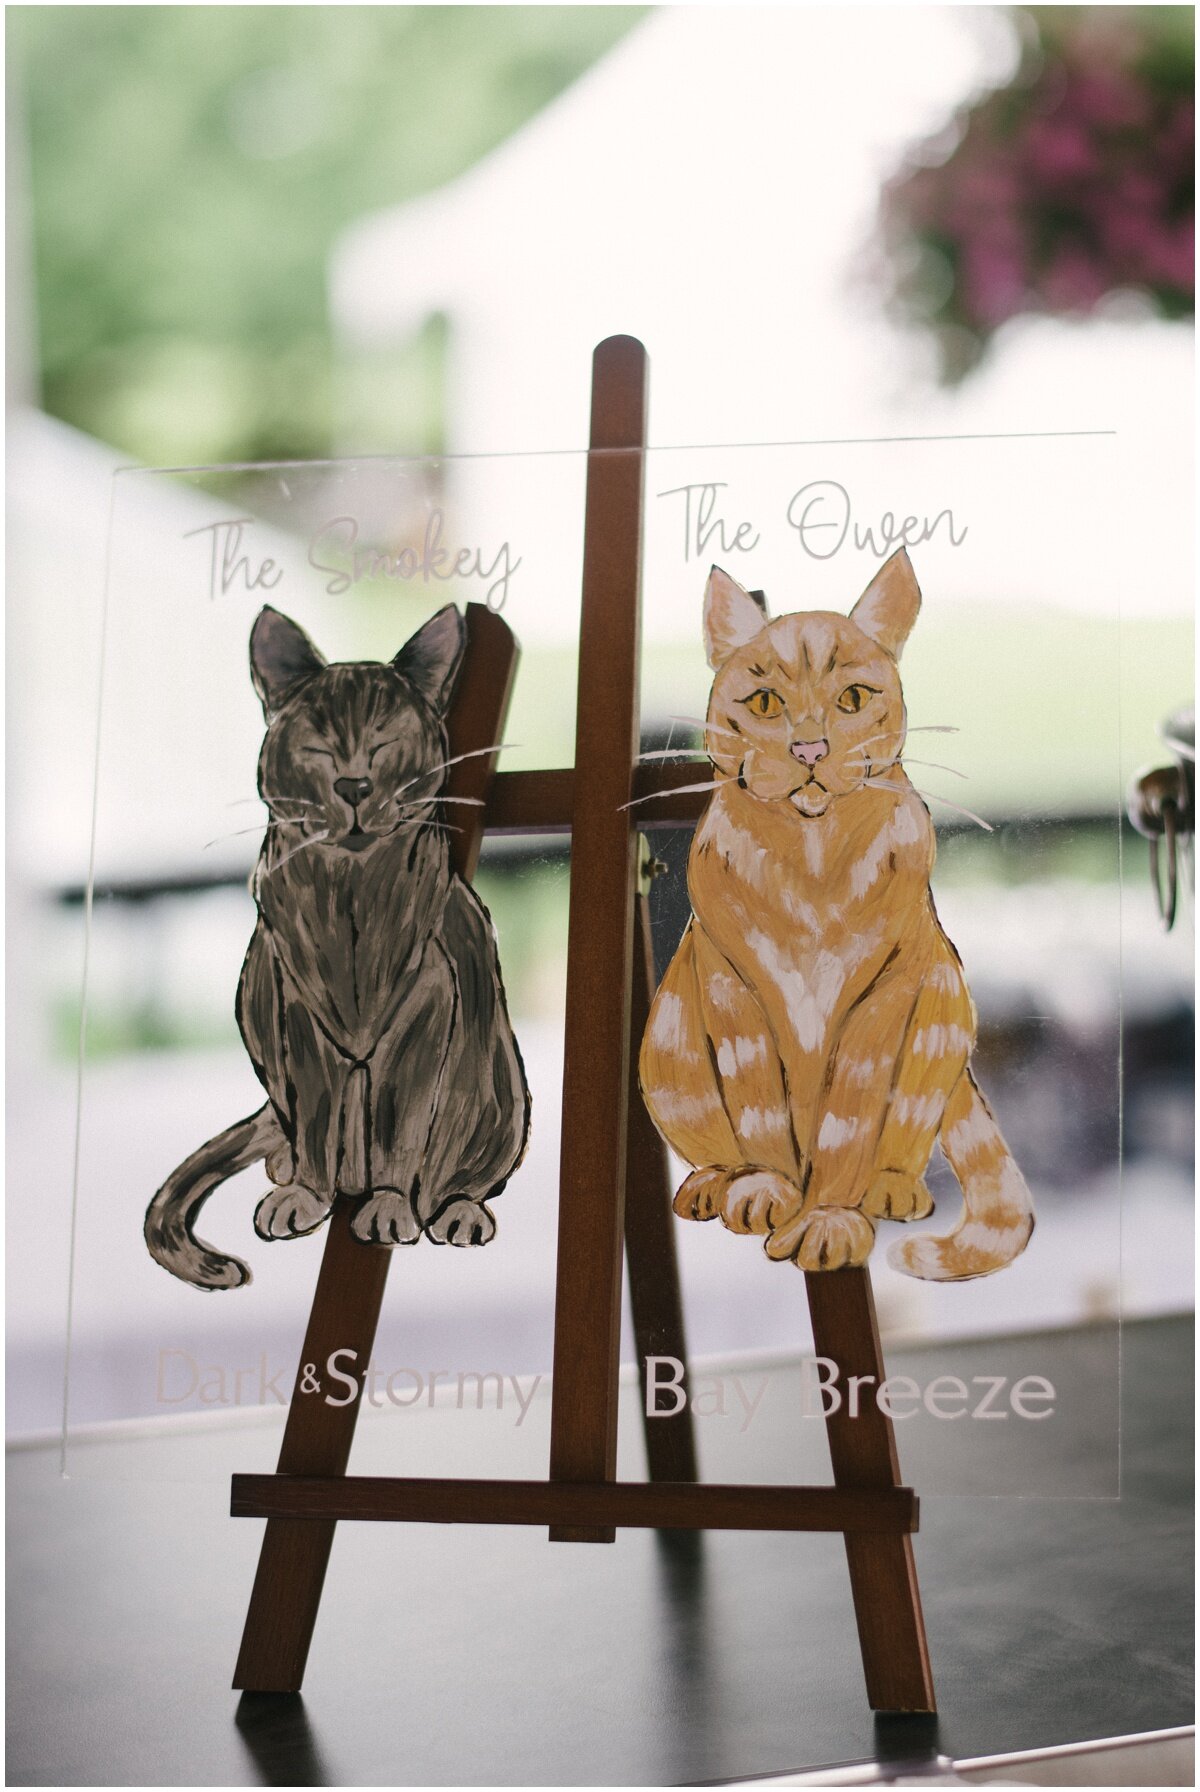  Acrylic sign with cats, personal wedding detail at private estate wedding 